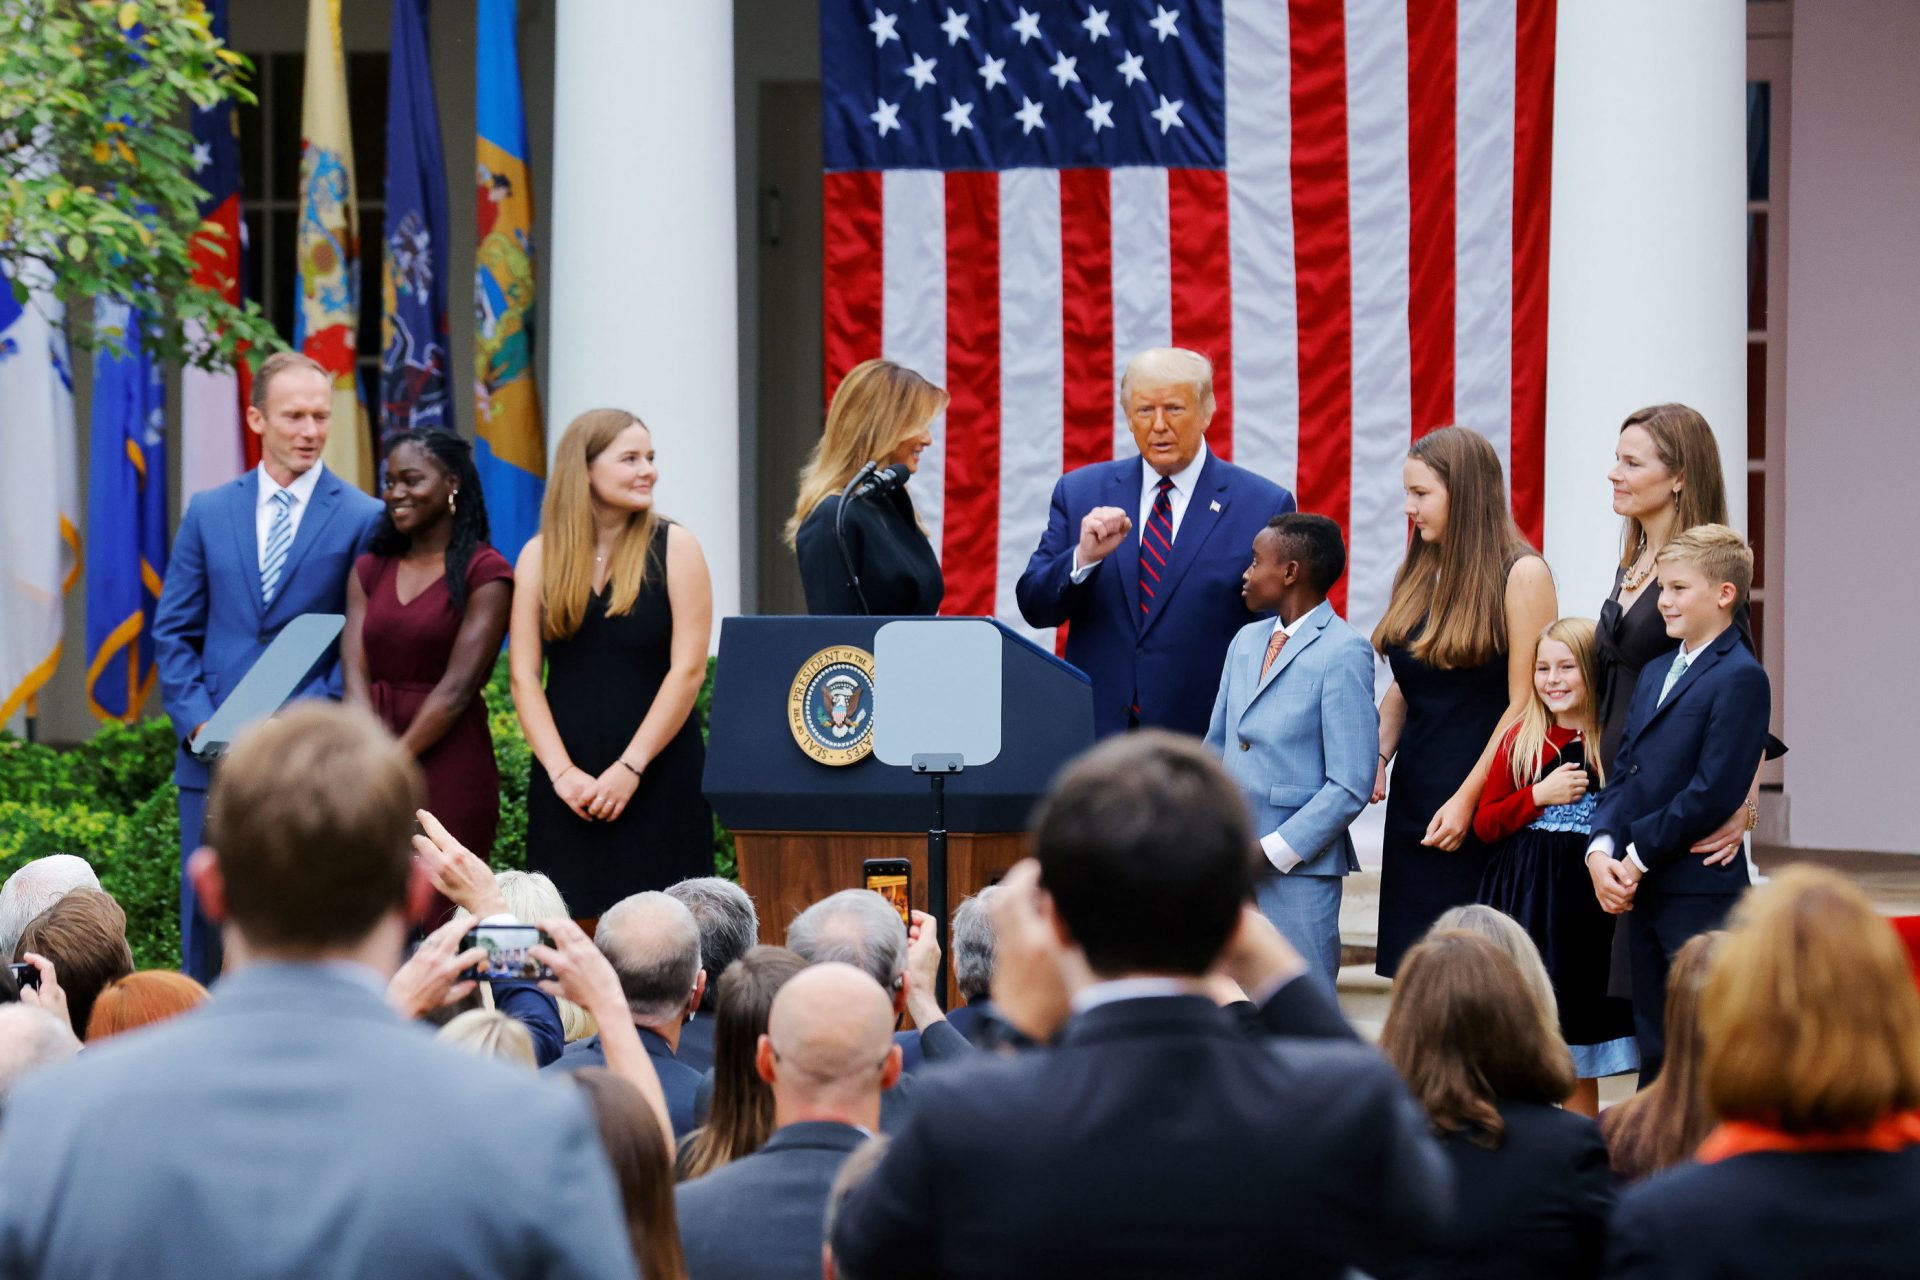 President Trump poses with Supreme Court nominee Amy Coney Barrett and her family at an event to announce her as his nominee on Saturday.